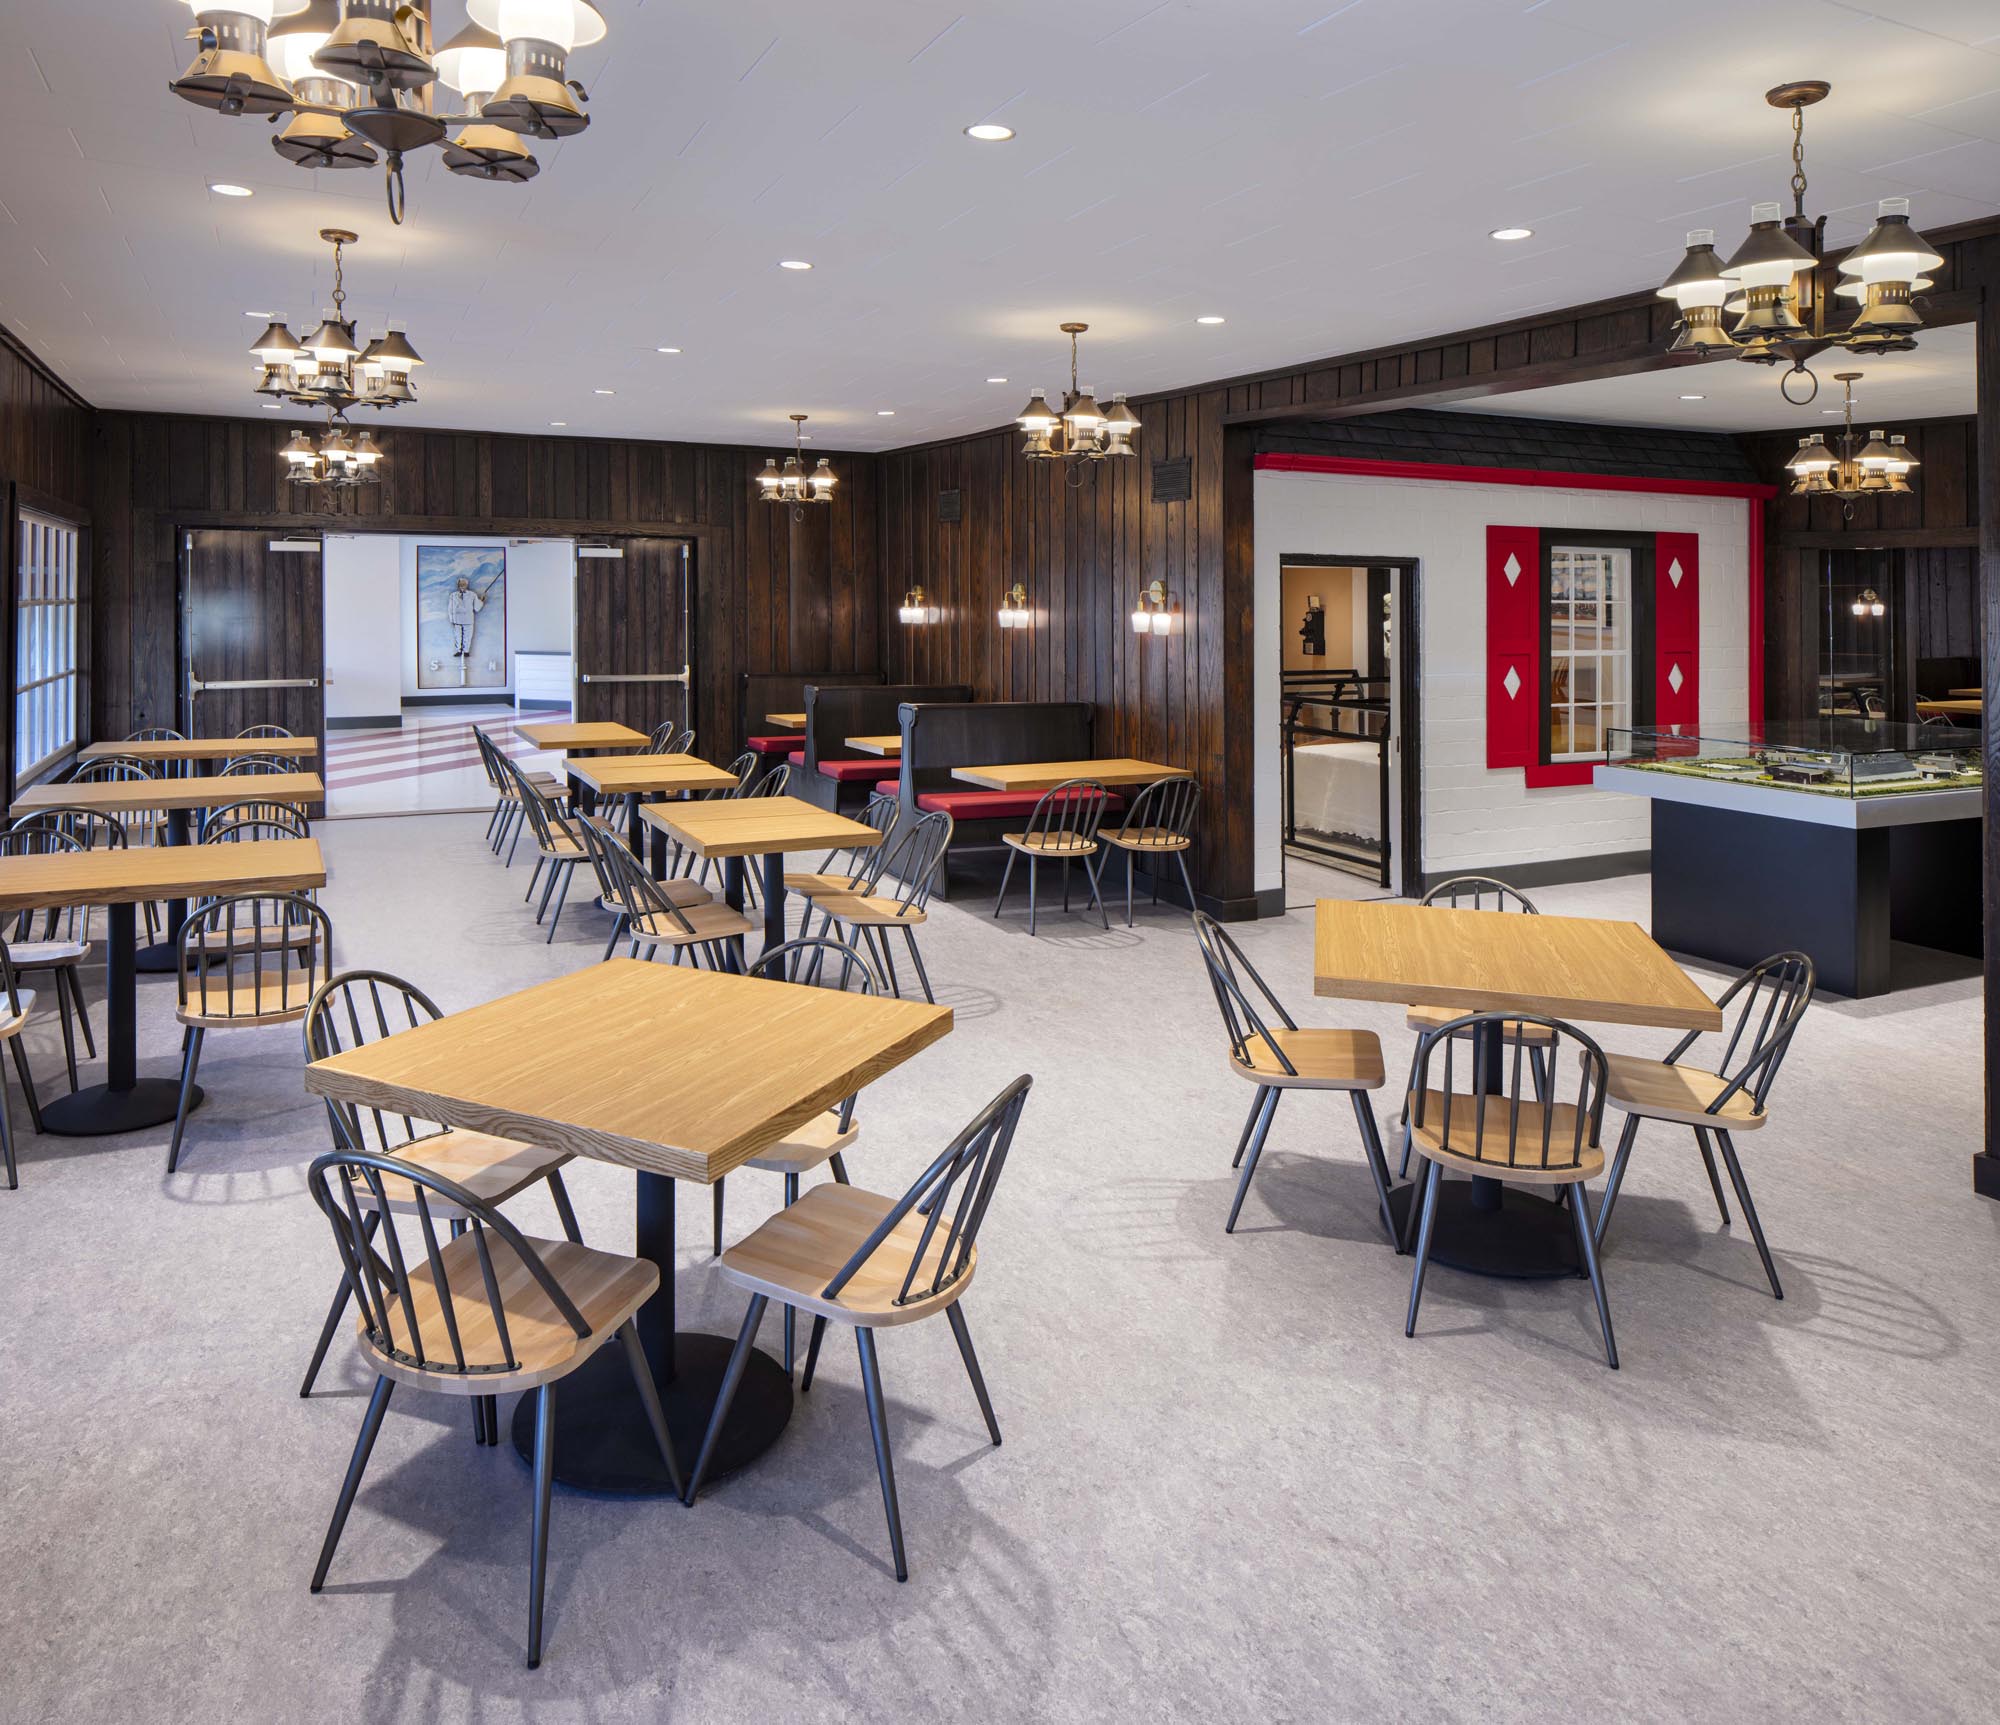 Retail Innovation Conference & Expo: How KFC reimagines the quick-serve experience